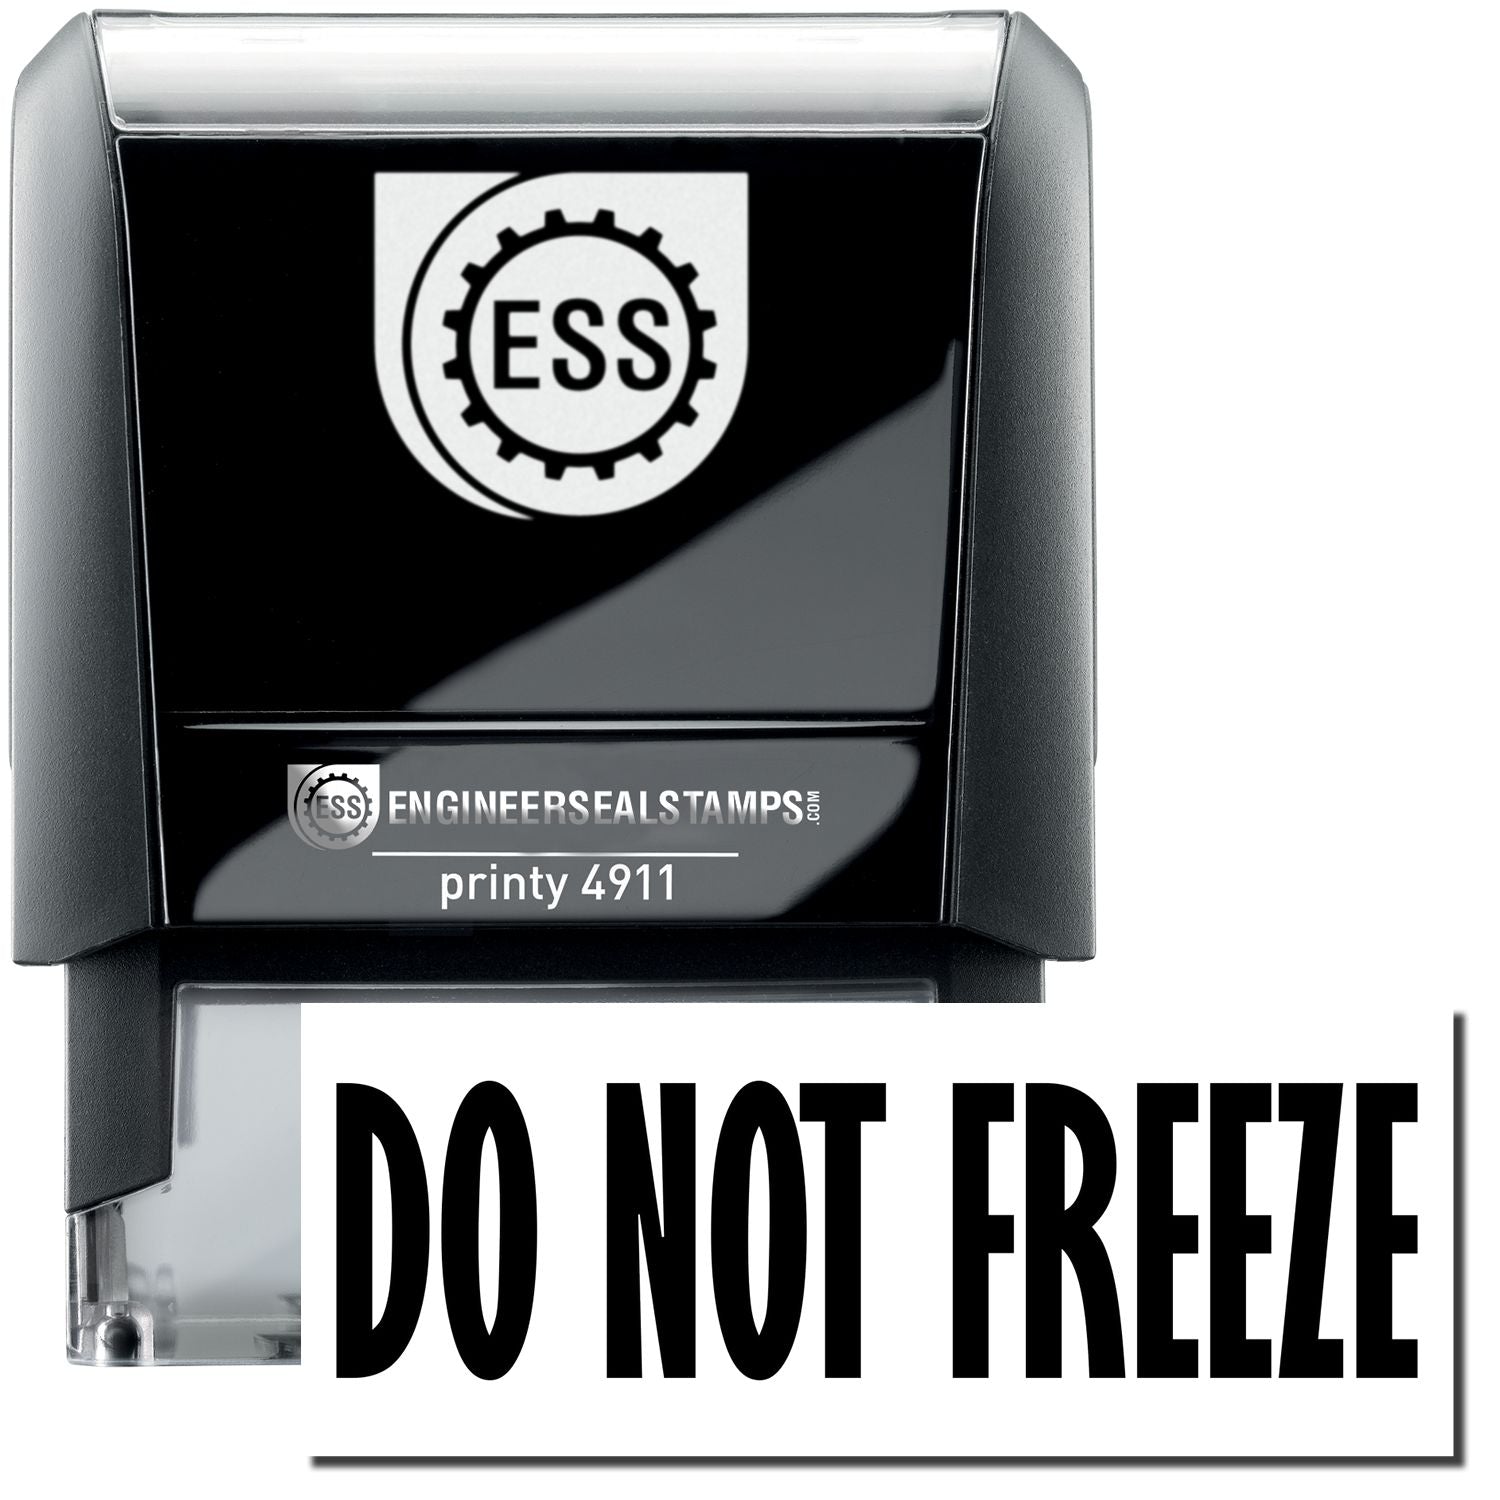 A self-inking stamp with a stamped image showing how the text "DO NOT FREEZE" is displayed after stamping.